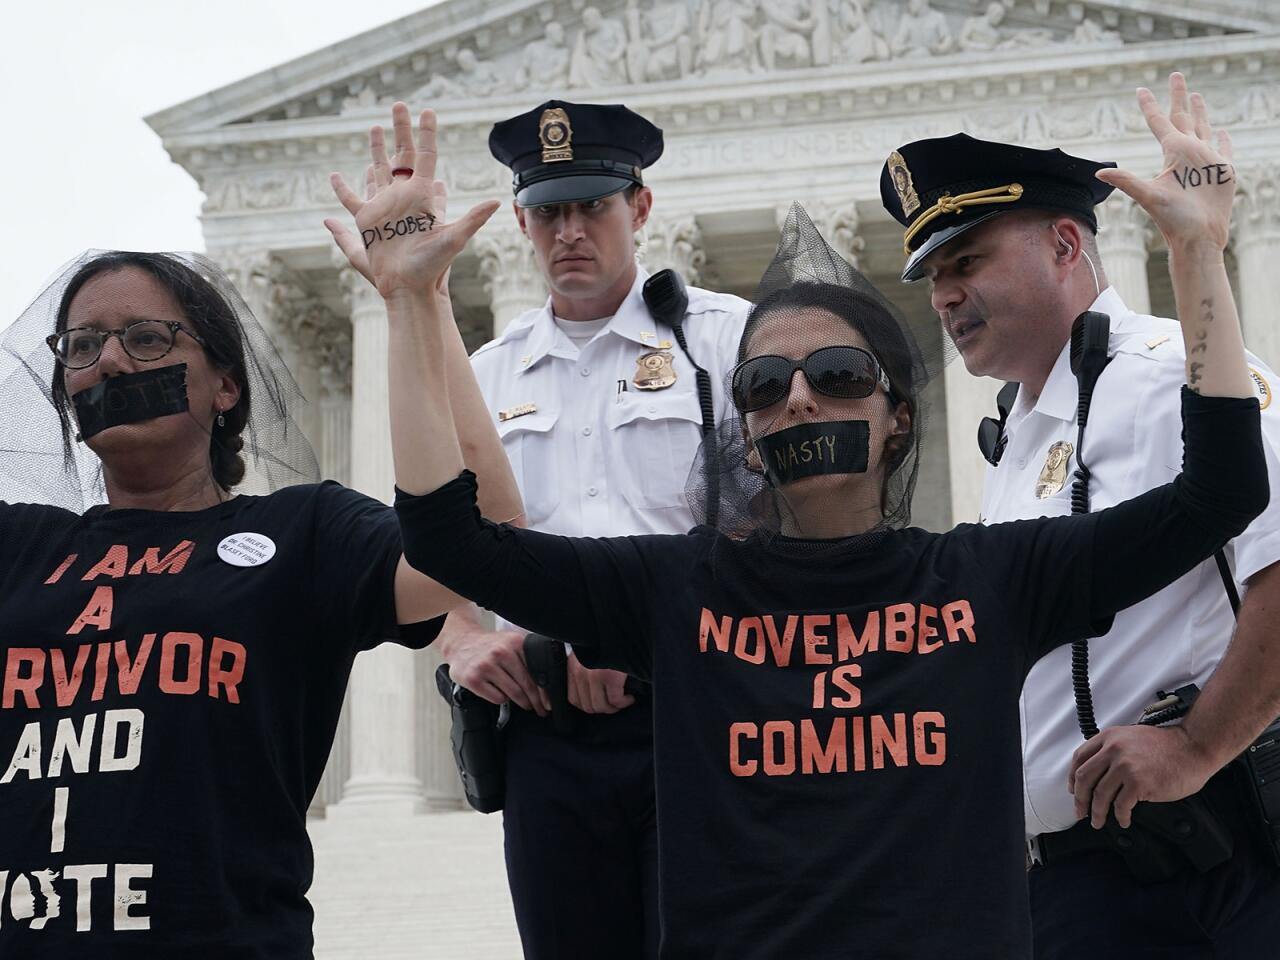 Police warn protesters occupying the front steps of the U.S. Supreme Court on Saturday to rally against the Kavanaugh confirmation.